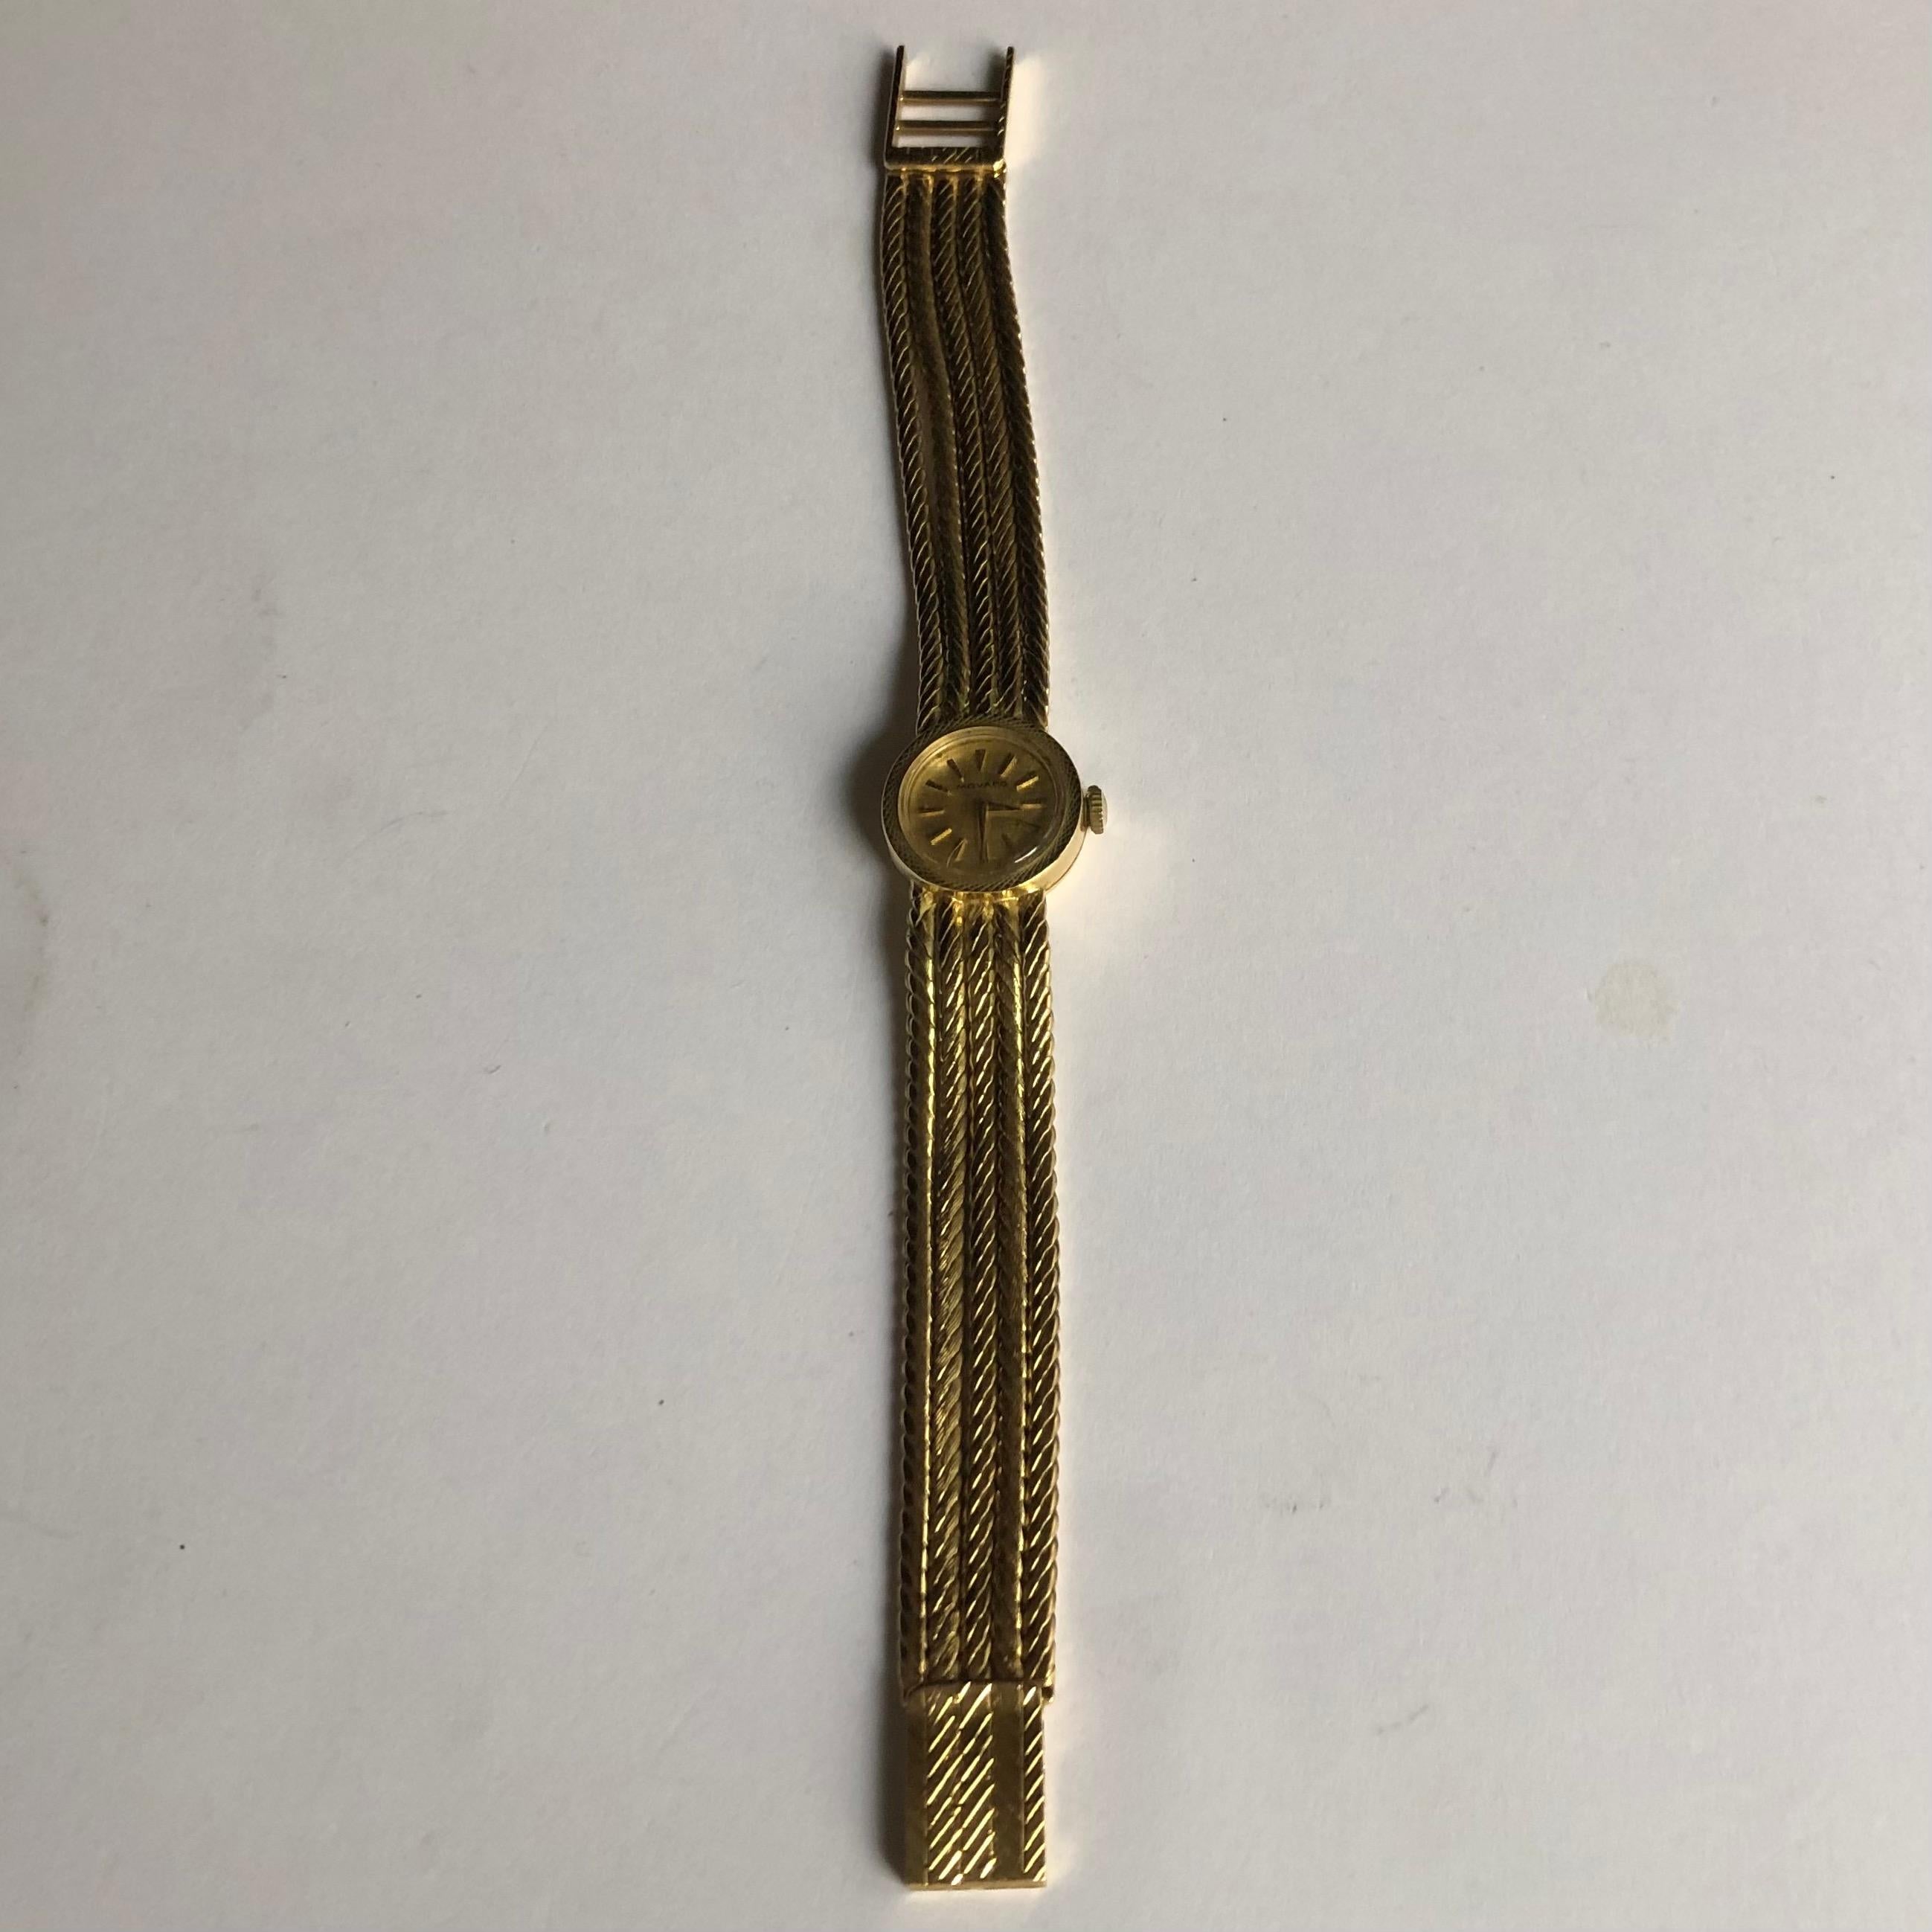 Full 18k Yellow Gold Movado jewel-watch. To be noted the beautiful, flexible, handmade 18K original gold bracelet, made of 5 chain-like elements.
Comes with original box.
Made in Switzerland. 
Hand-wound mechanical.

Weight: 40.08g 
Length:  16.5cm